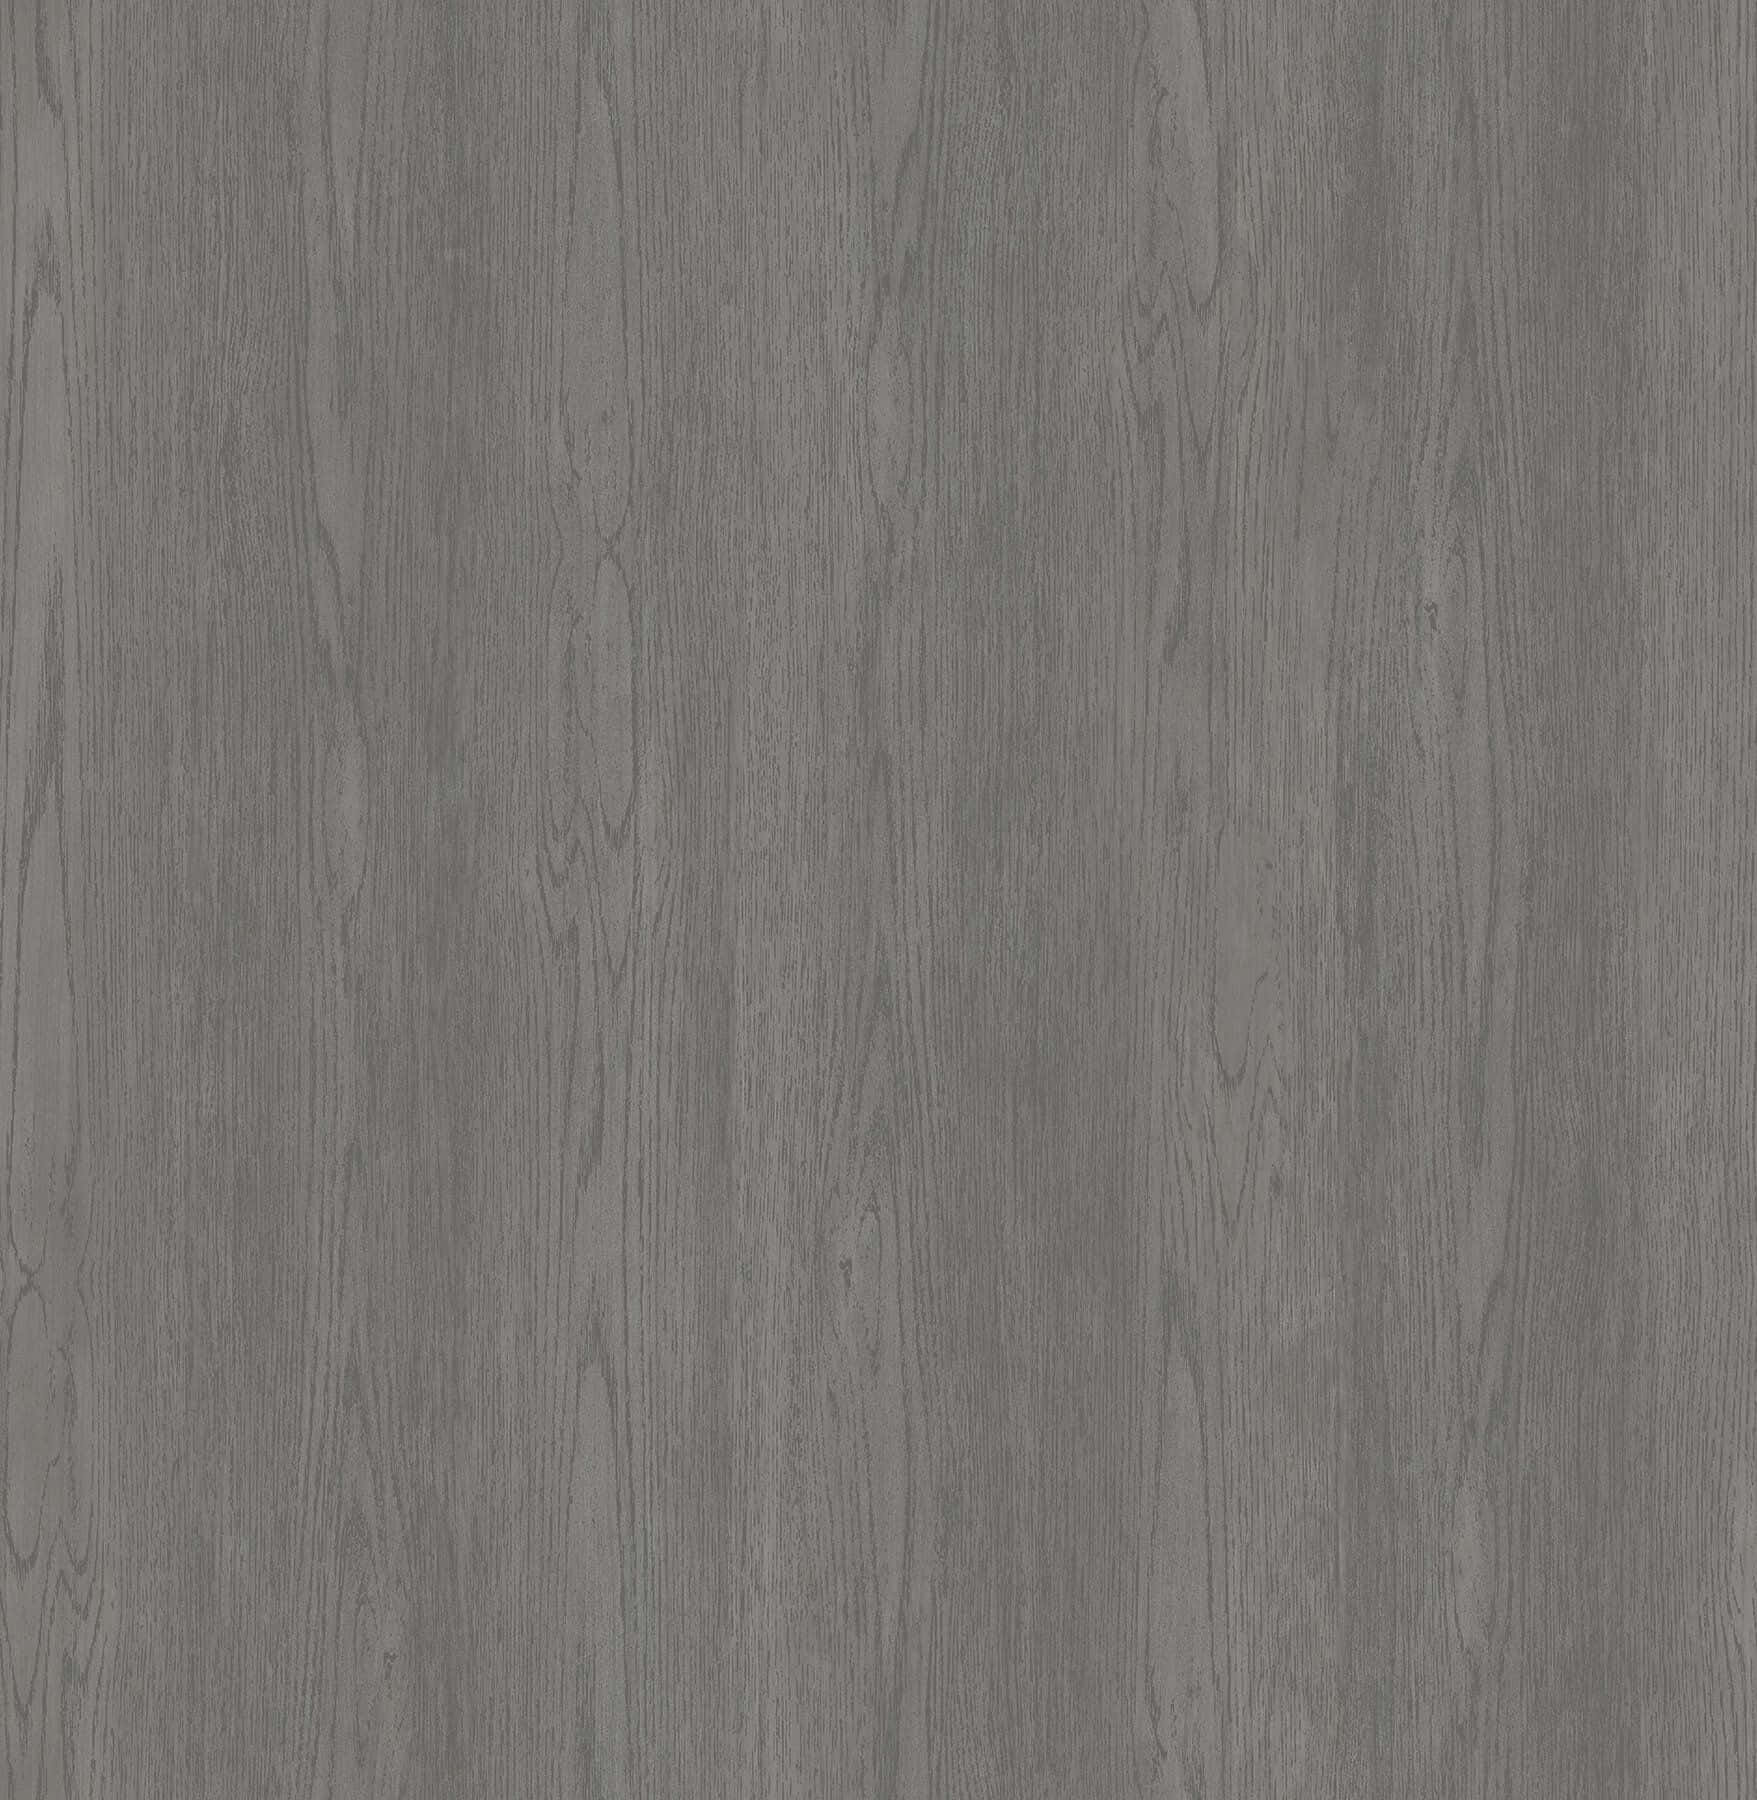 A Gray Wood Texture With A Light Gray Color